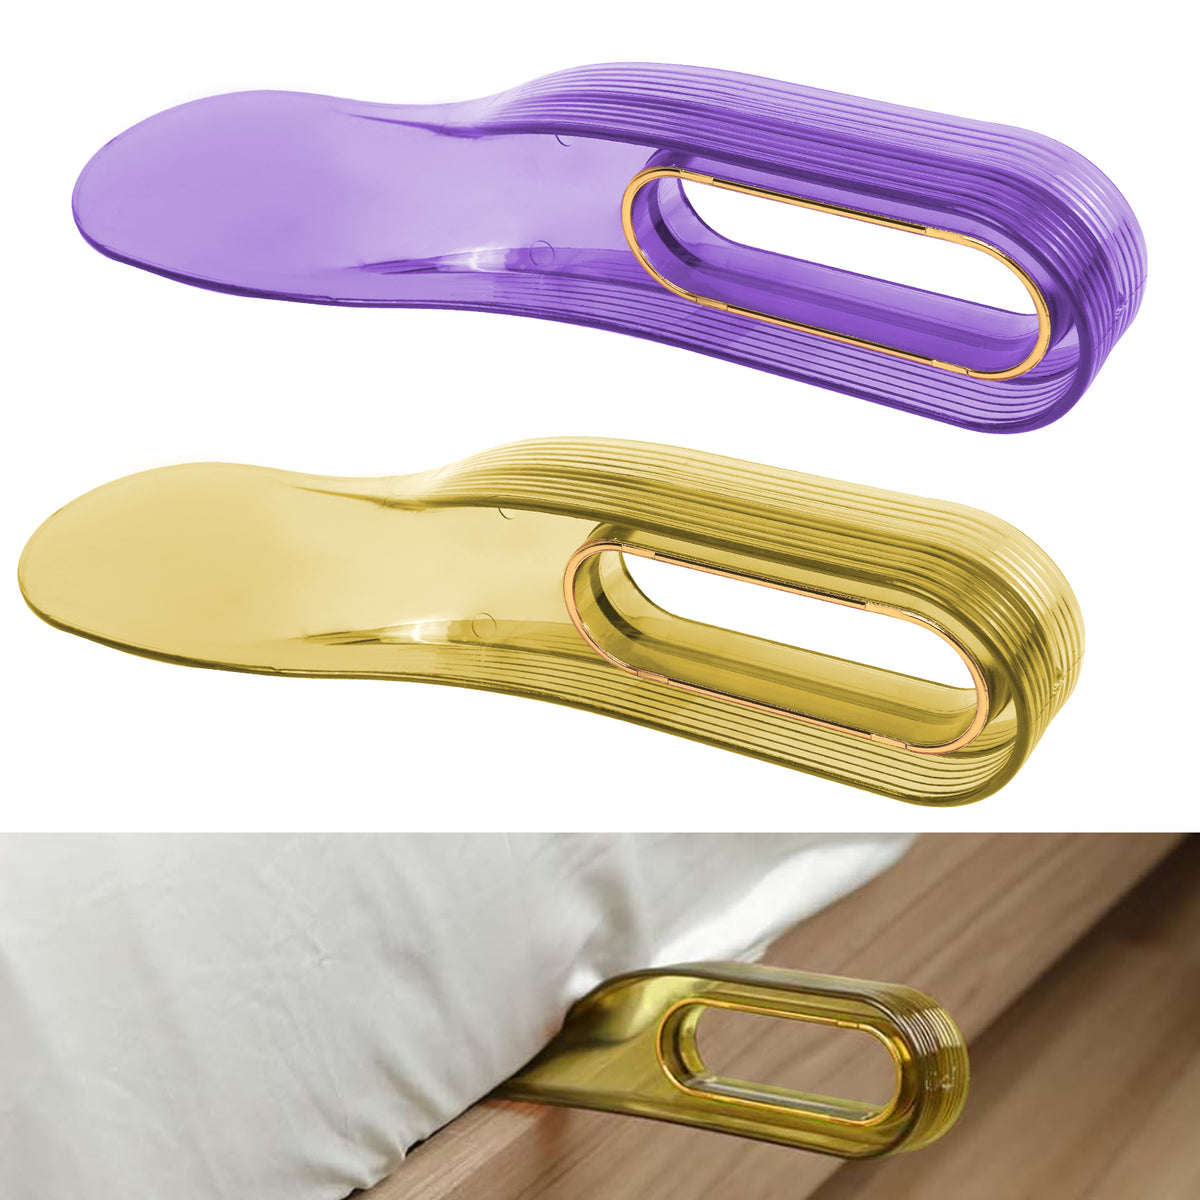 Adorila 2 Pack Mattress Lifter Tool for Changing Sheets, Bed Sheet Tucker Tool for Making Bed, Mattress Tucker Tool Paddle (Yellow & Purple)